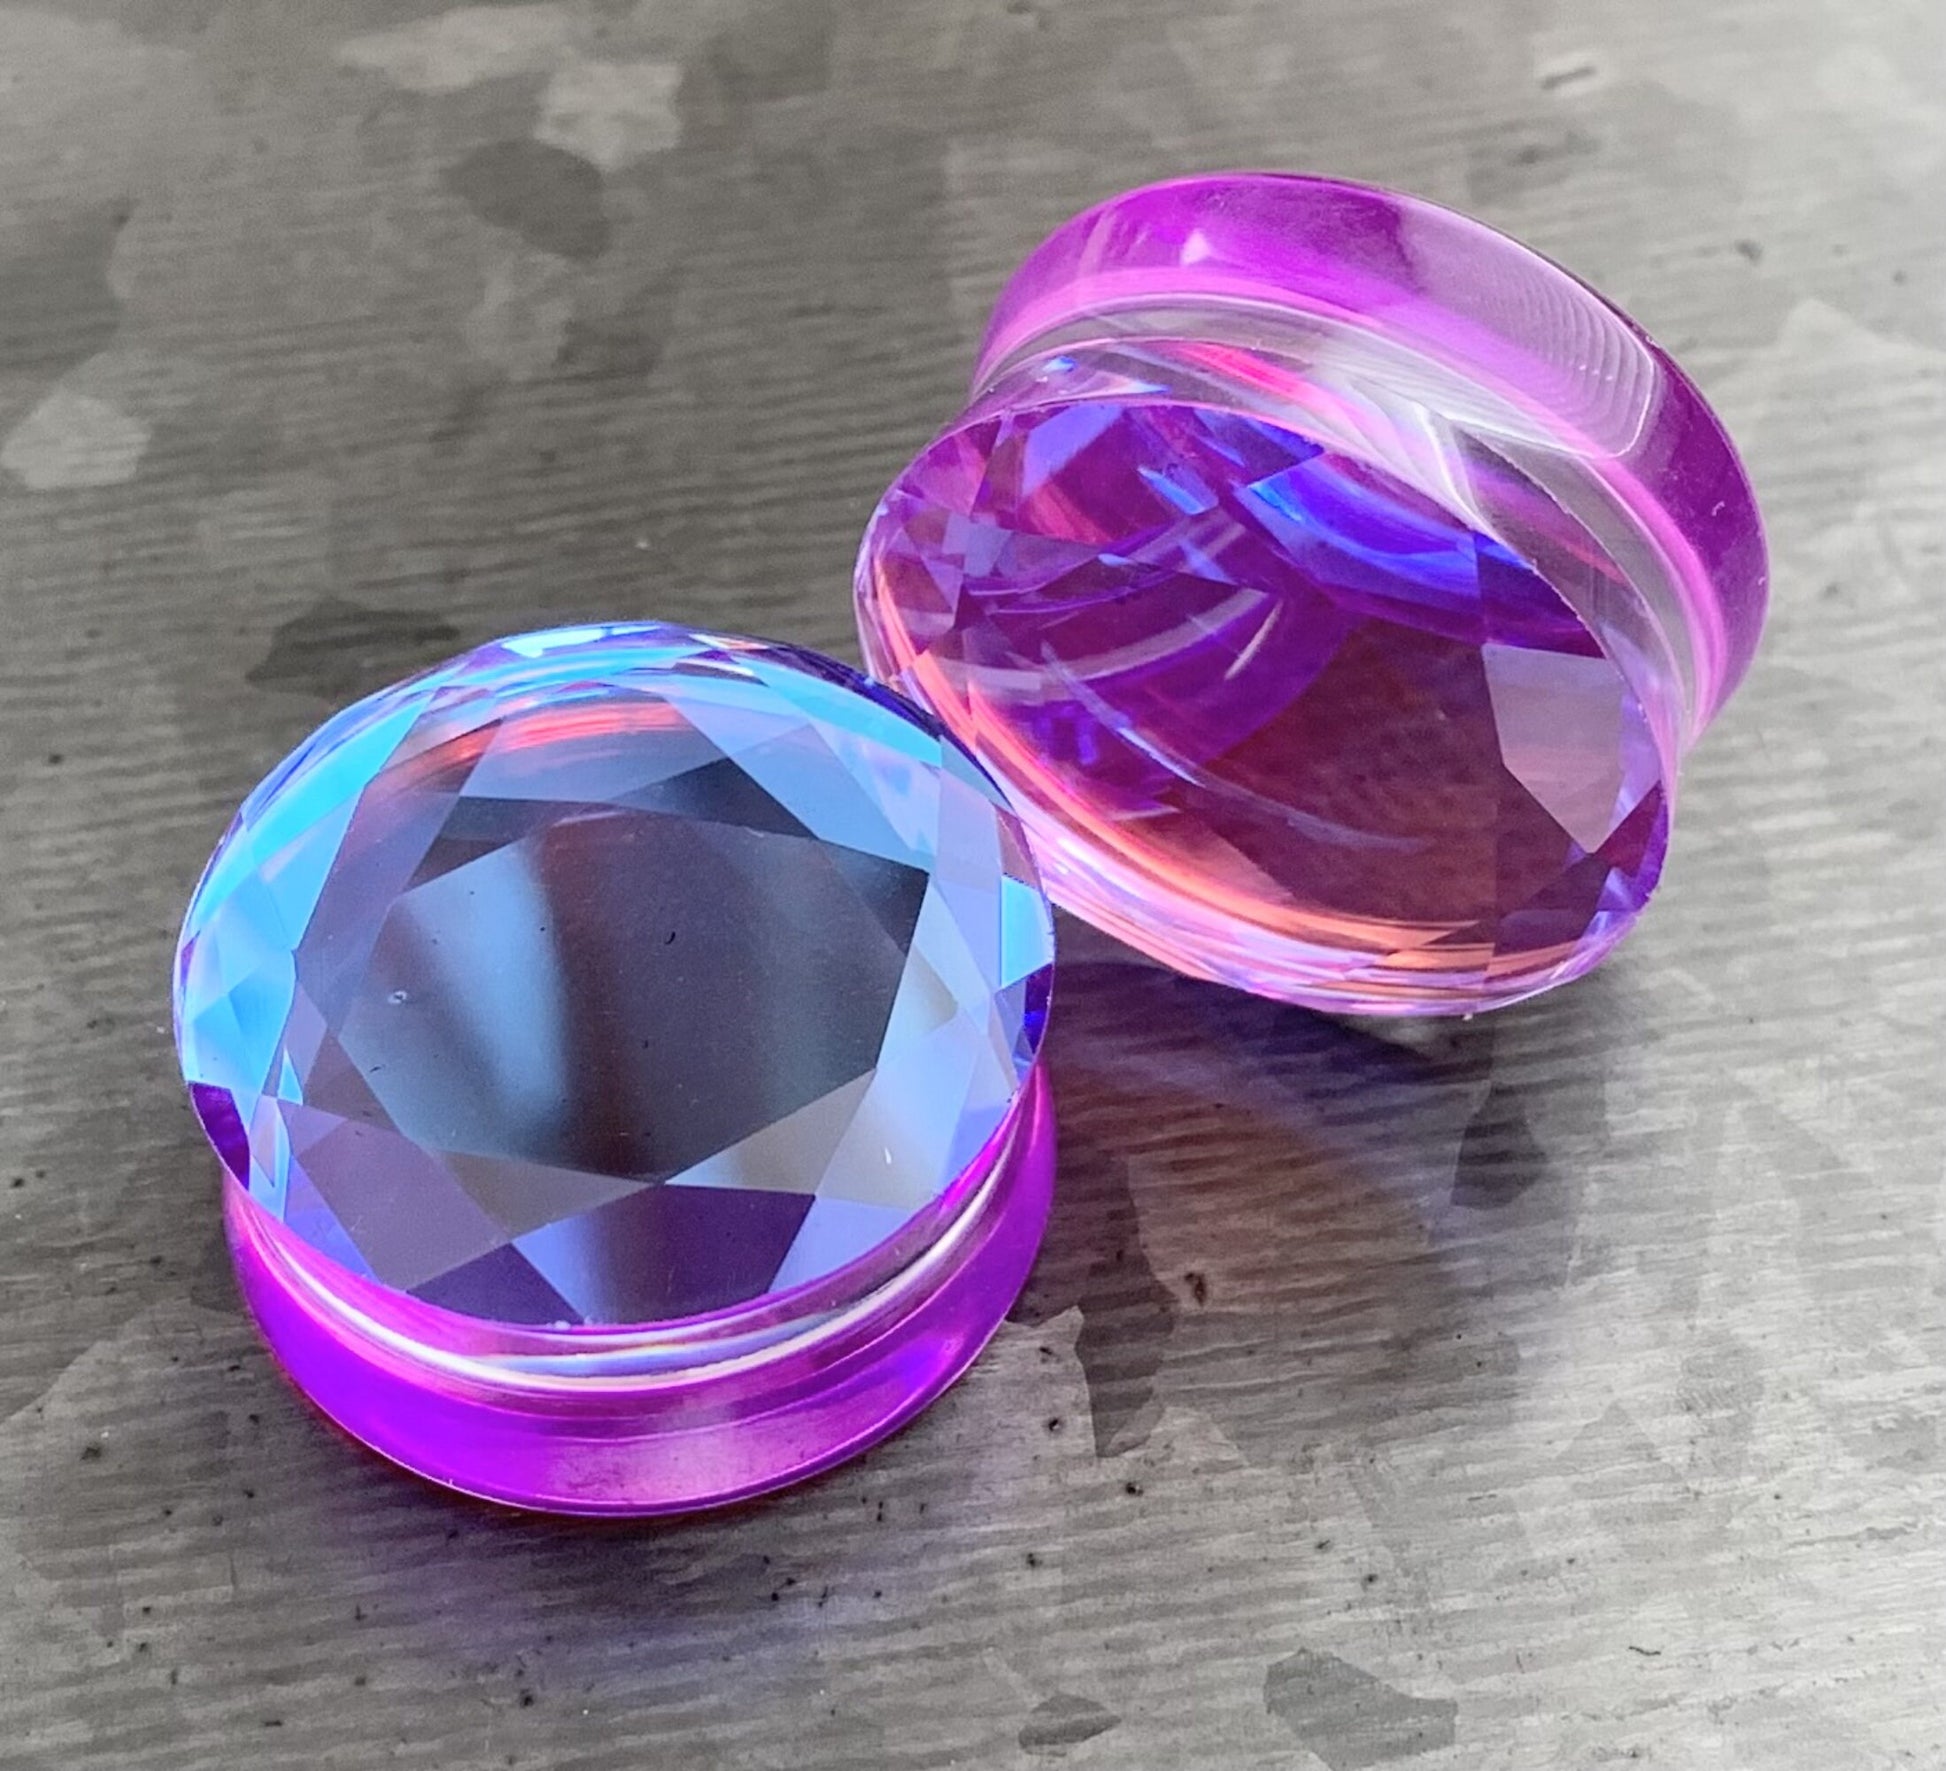 PAIR of Stunning Faceted Mermaid Iridescent Glass Double Flare Plugs - Gauges 2g (6.5mm) thru 1" (25mm) available!